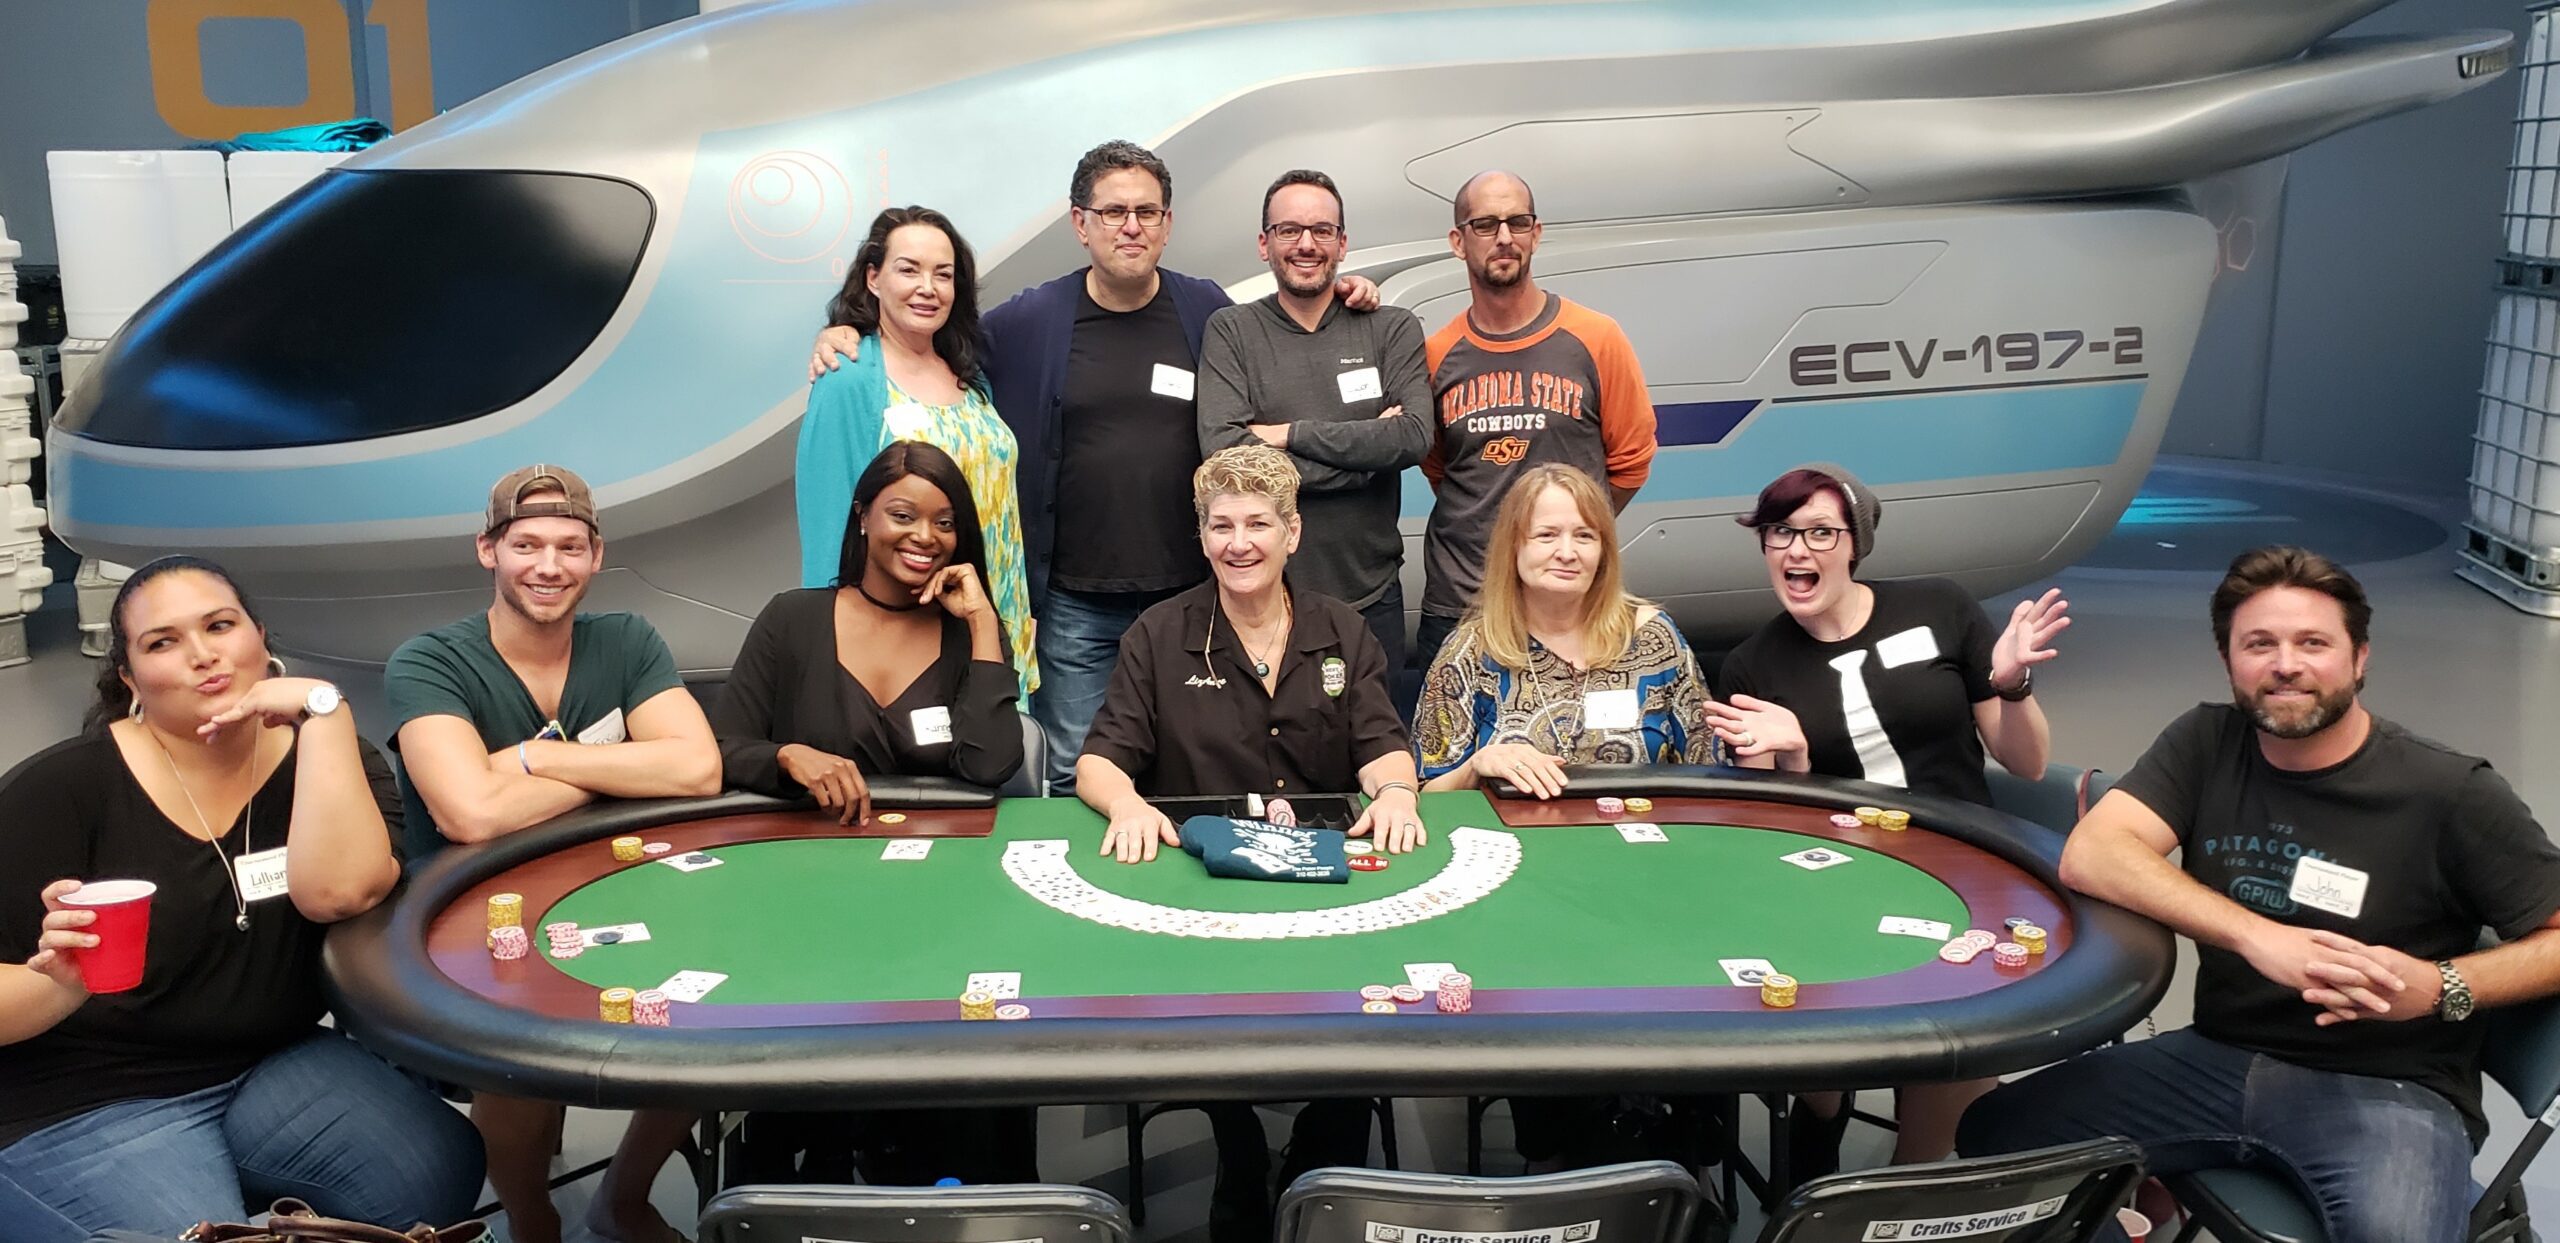 Final table on Orville set - cropped